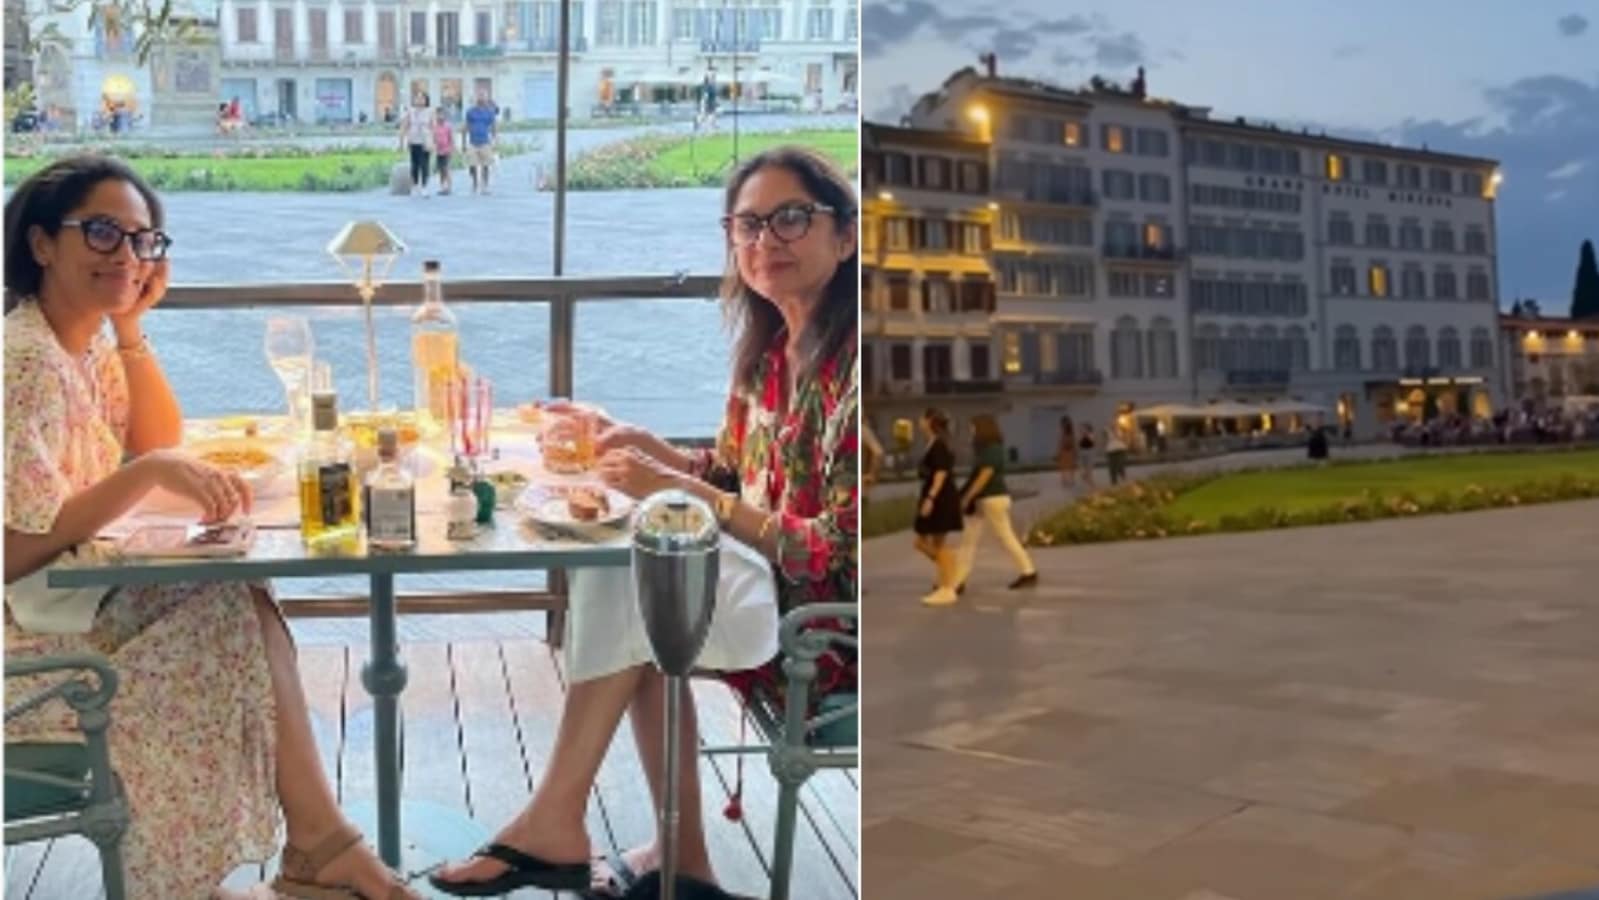 neena-gupta-says-betis-are-the-best-as-she-dines-with-daughter-masaba-gupta-in-italy-watch